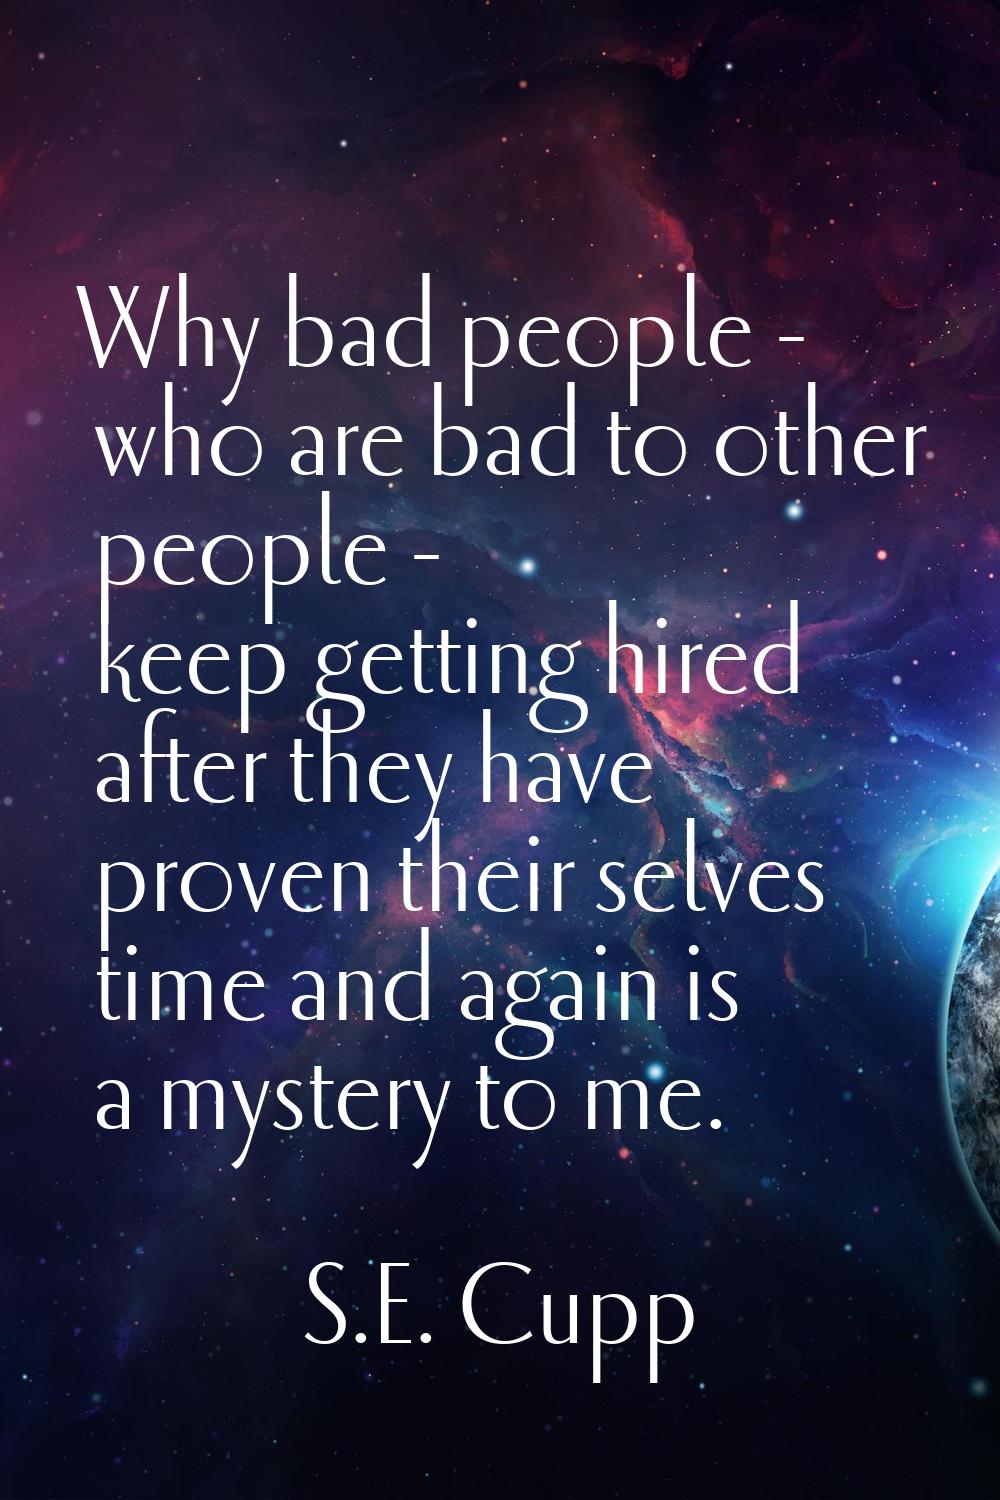 Why bad people - who are bad to other people - keep getting hired after they have proven their selv